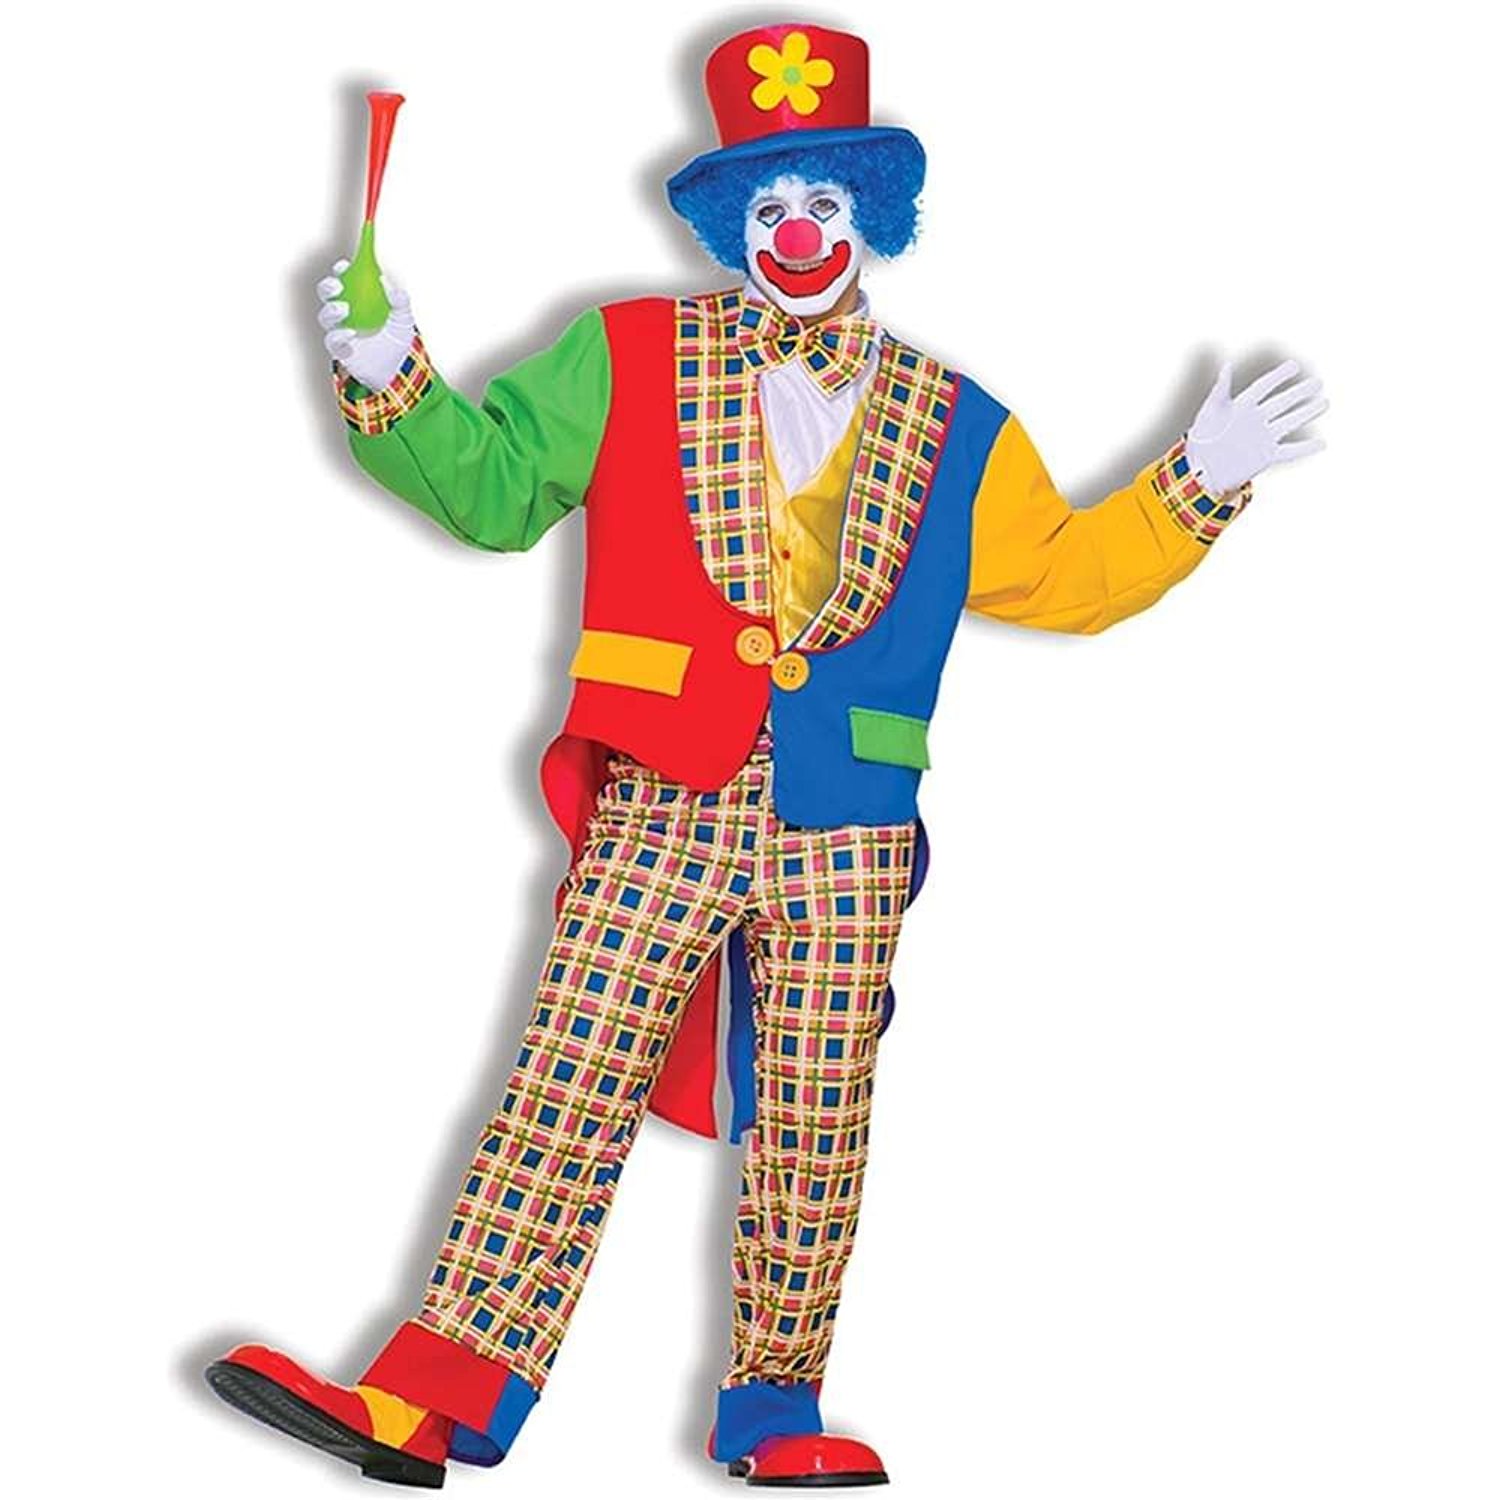 Amazon Pluspng.com: Menu0027S Clown On The Town Costume, Blue/red, One Size: Clothing - Clown, Transparent background PNG HD thumbnail